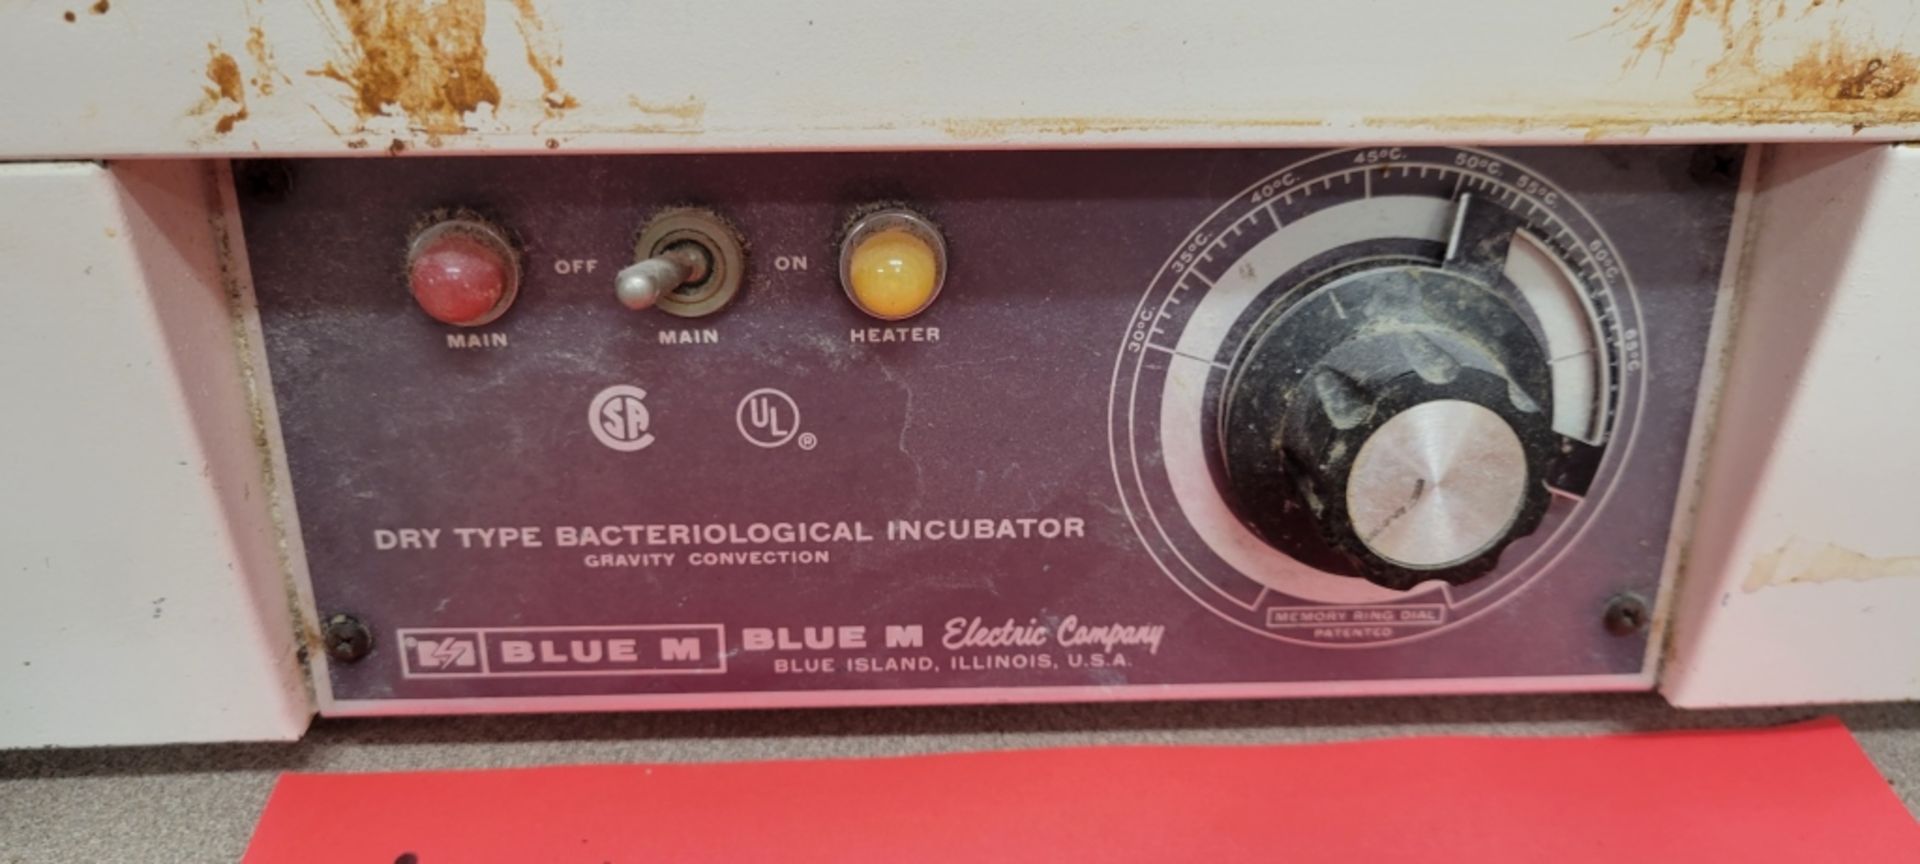 Blue-M Benchtop Dry Type Bacterialogical Incubator - Image 4 of 4